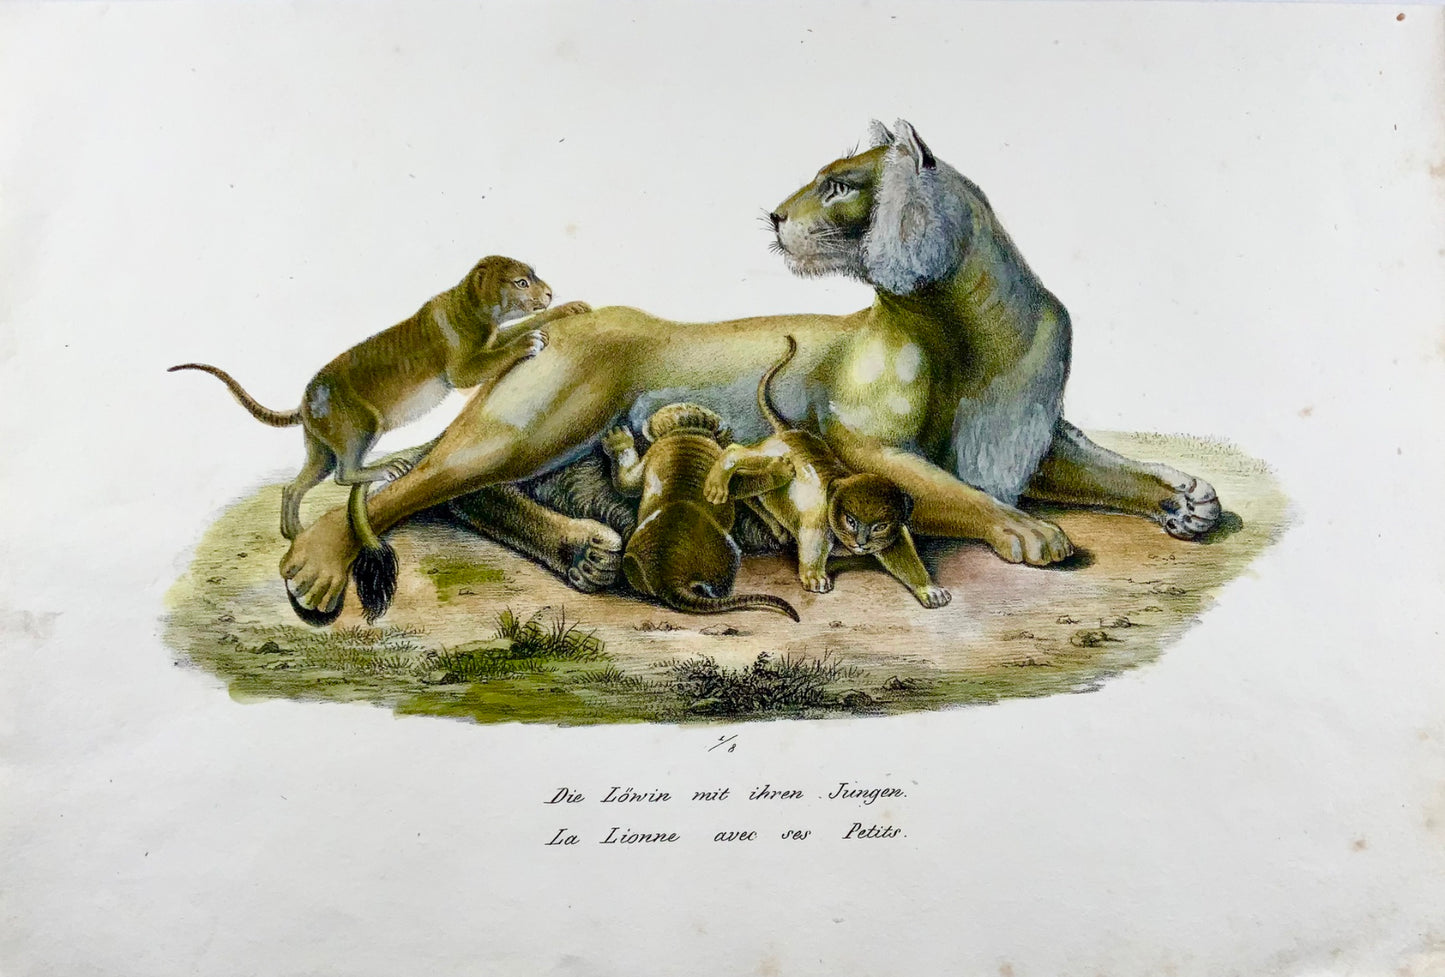 1824 Lioness with Cubs - K.J. Brodtmann hand colored FOLIO lithograph - Mammals